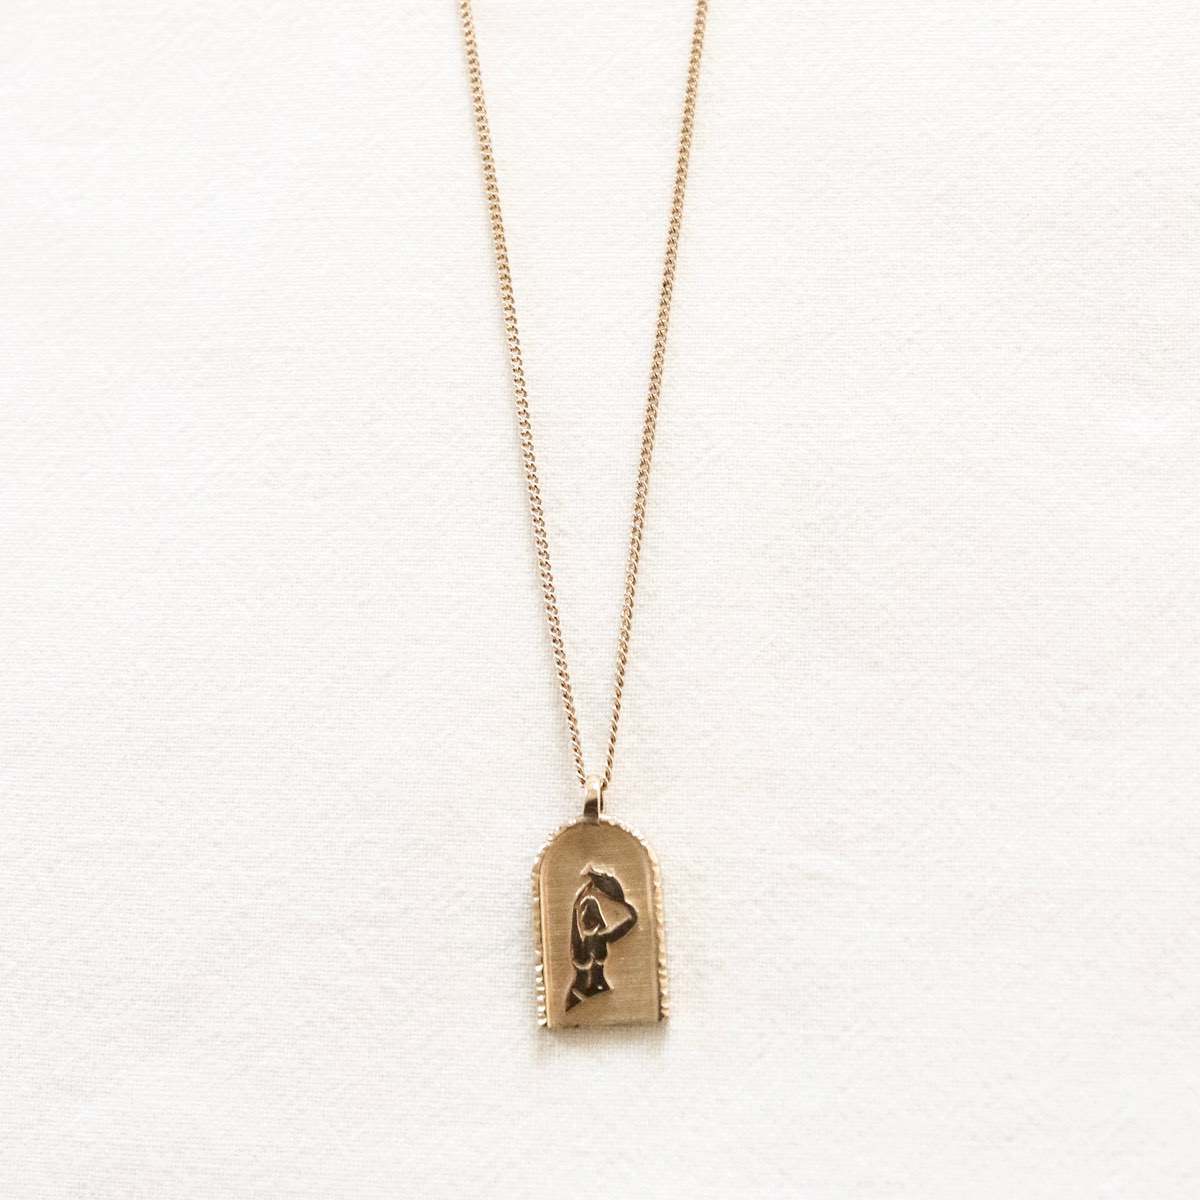 Archive — Zodiac Necklace | The Fishes